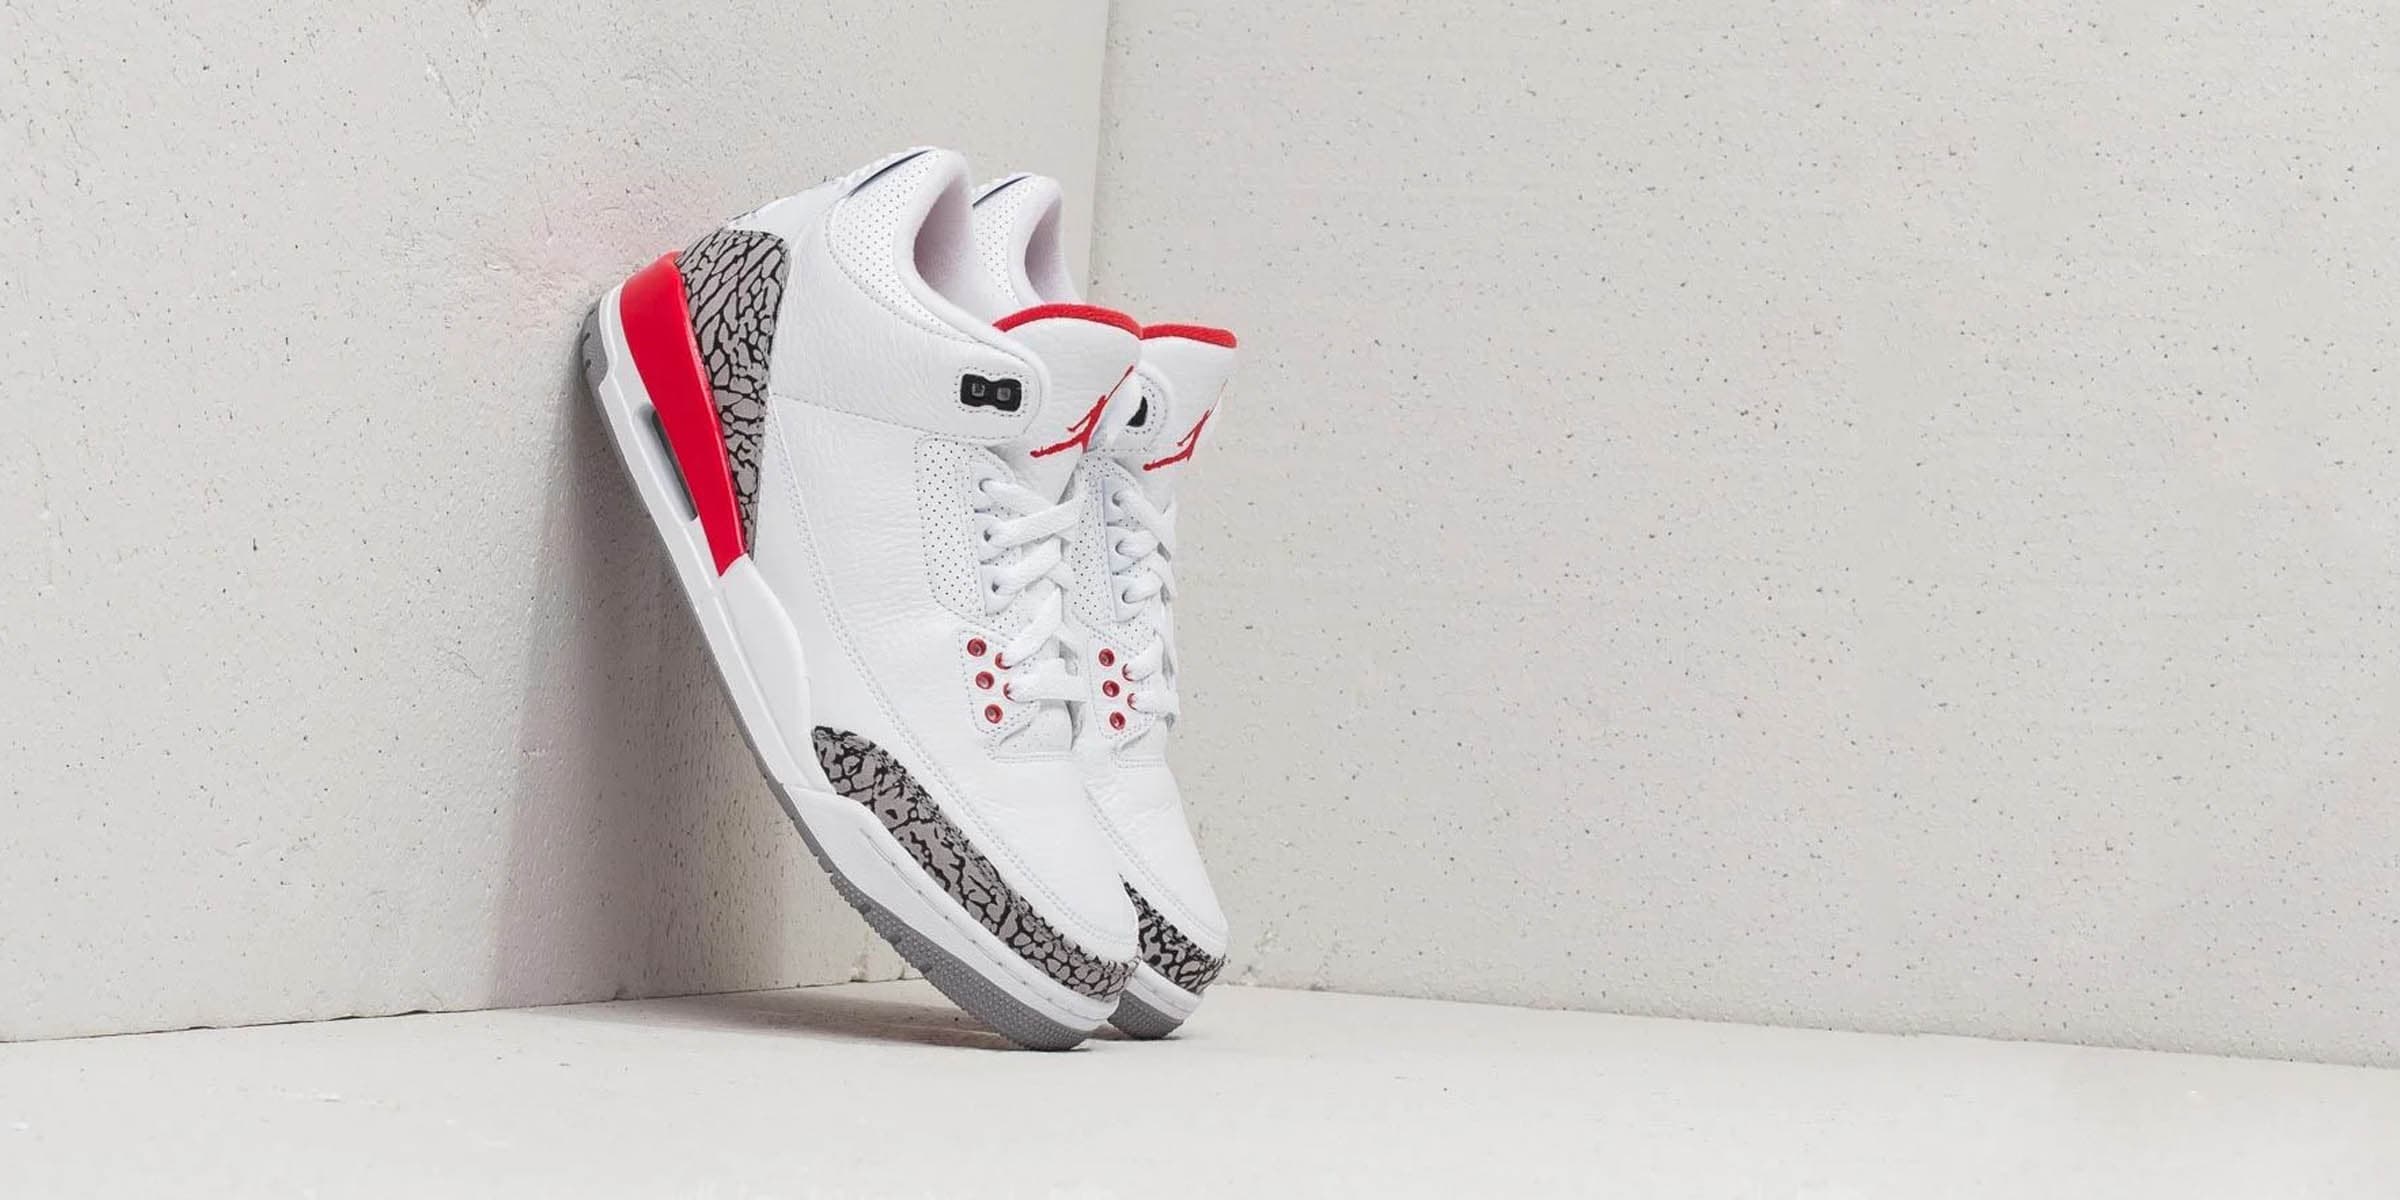 A White Air Jordan 3 Will Release for Summer - WearTesters